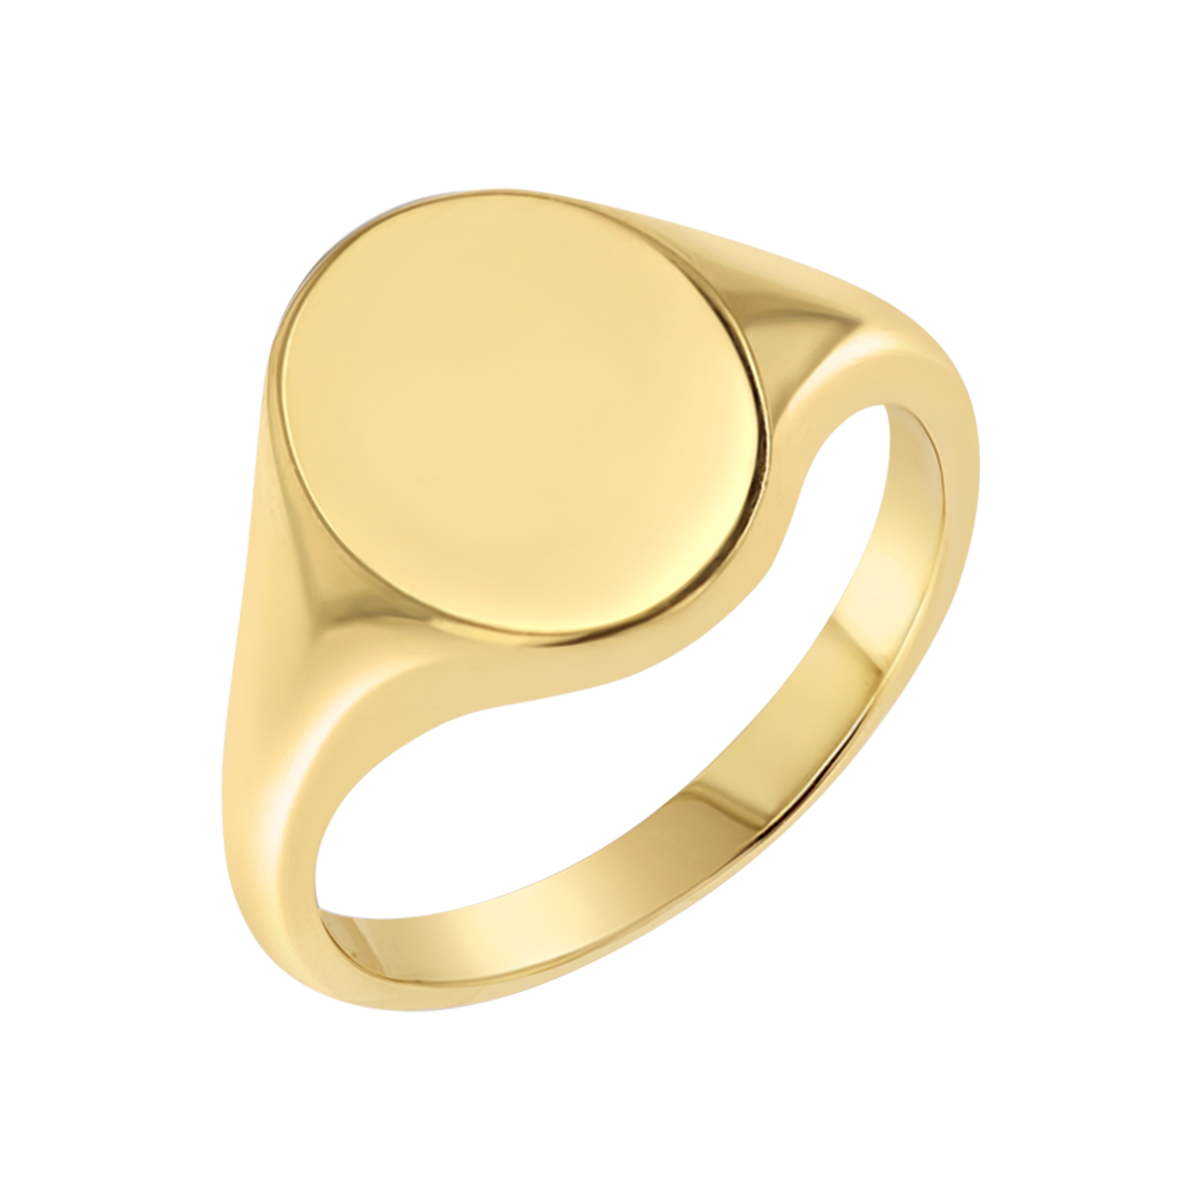 Gold Monogram Ring 14K Gold / Rush It! Ships in Approx 7 Business Days